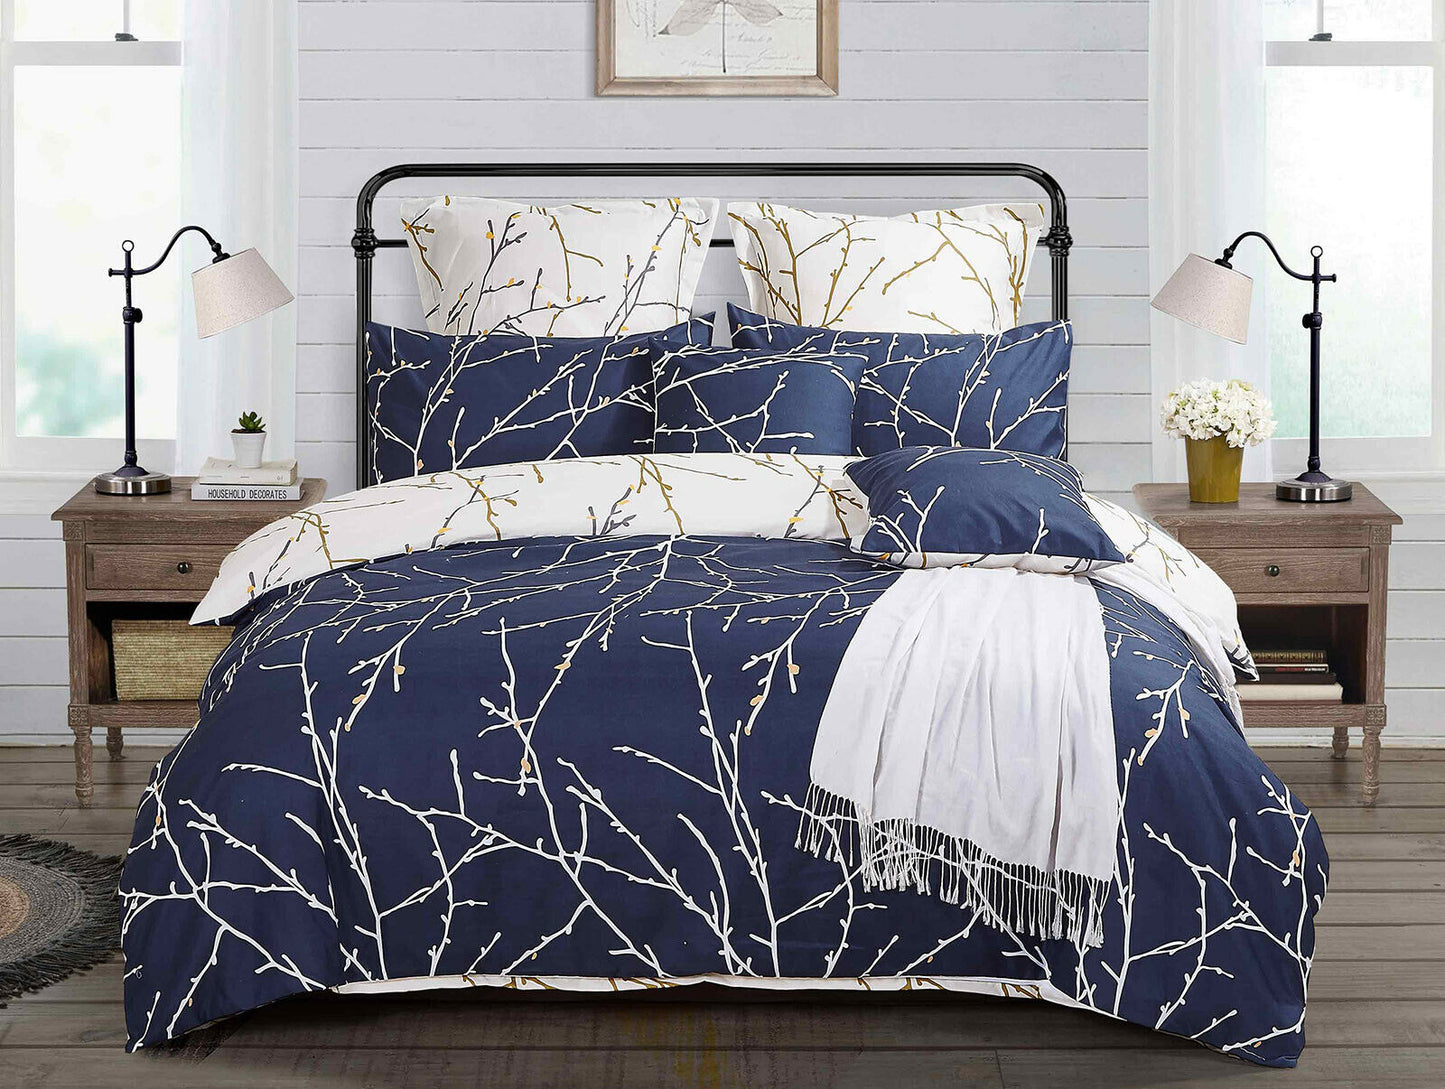 TREE Reversible Double Queen/King/Super King Size Duvet/Doona/Quilt Cover Set Collection